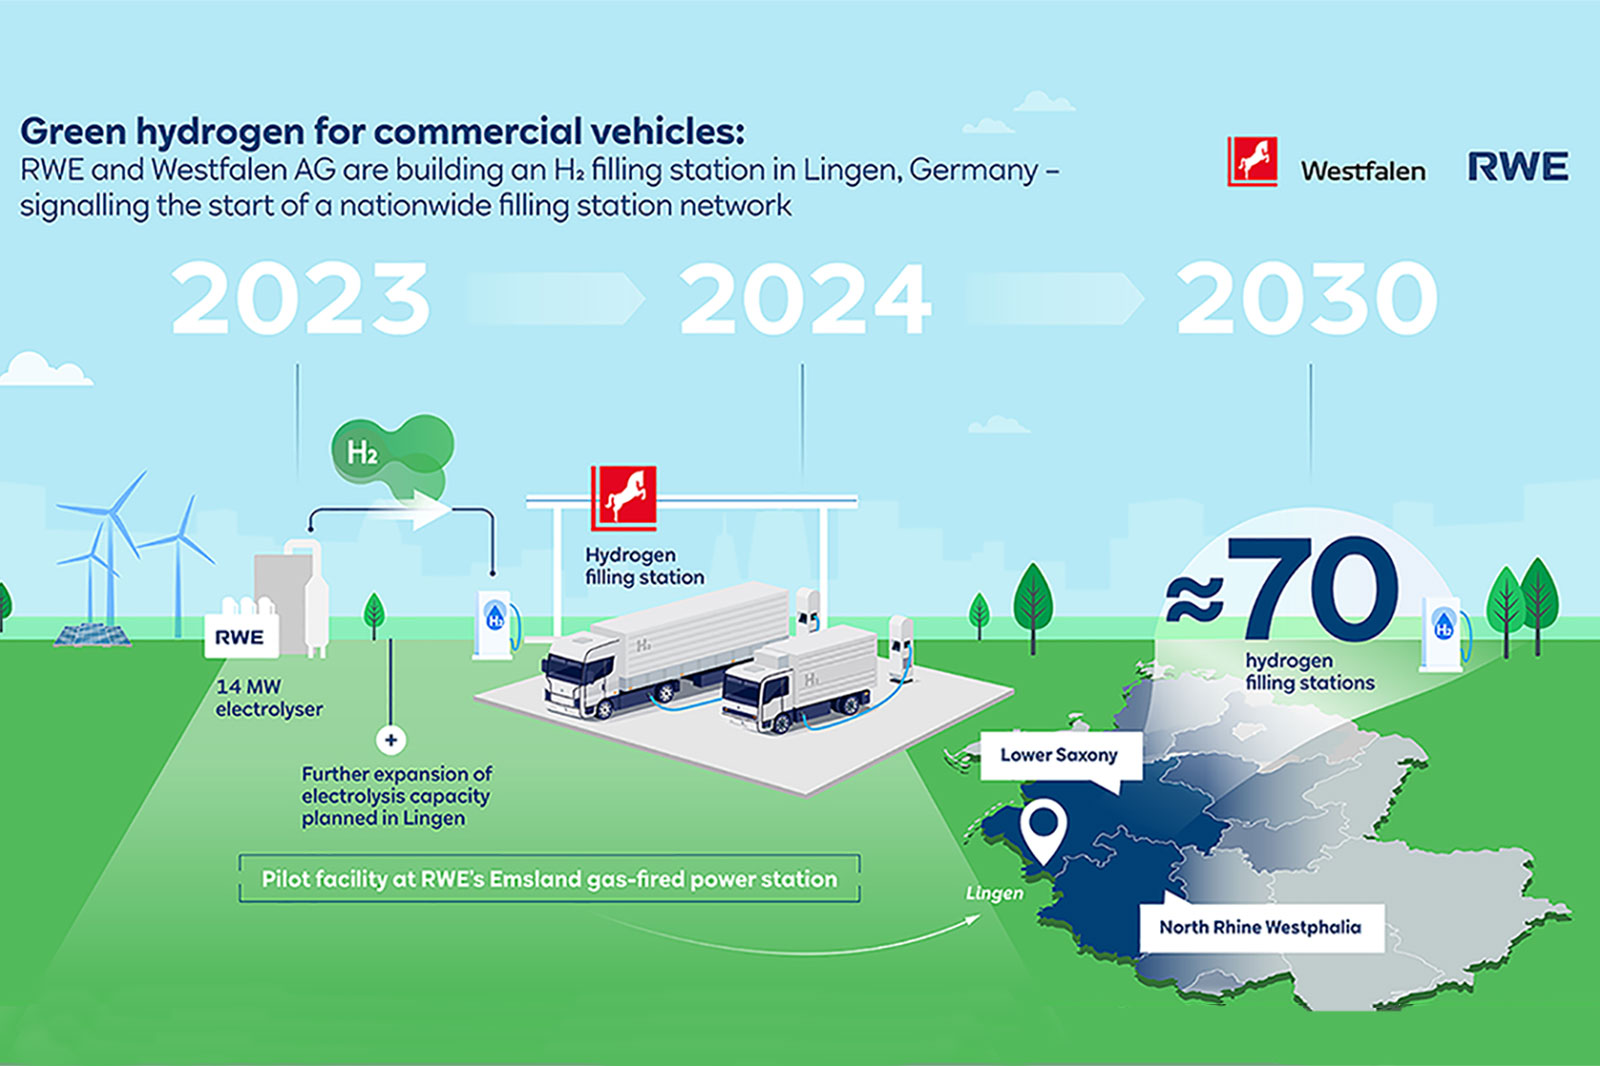 Green hydrogen for commercial vehicles – RWE and Westfalen Group